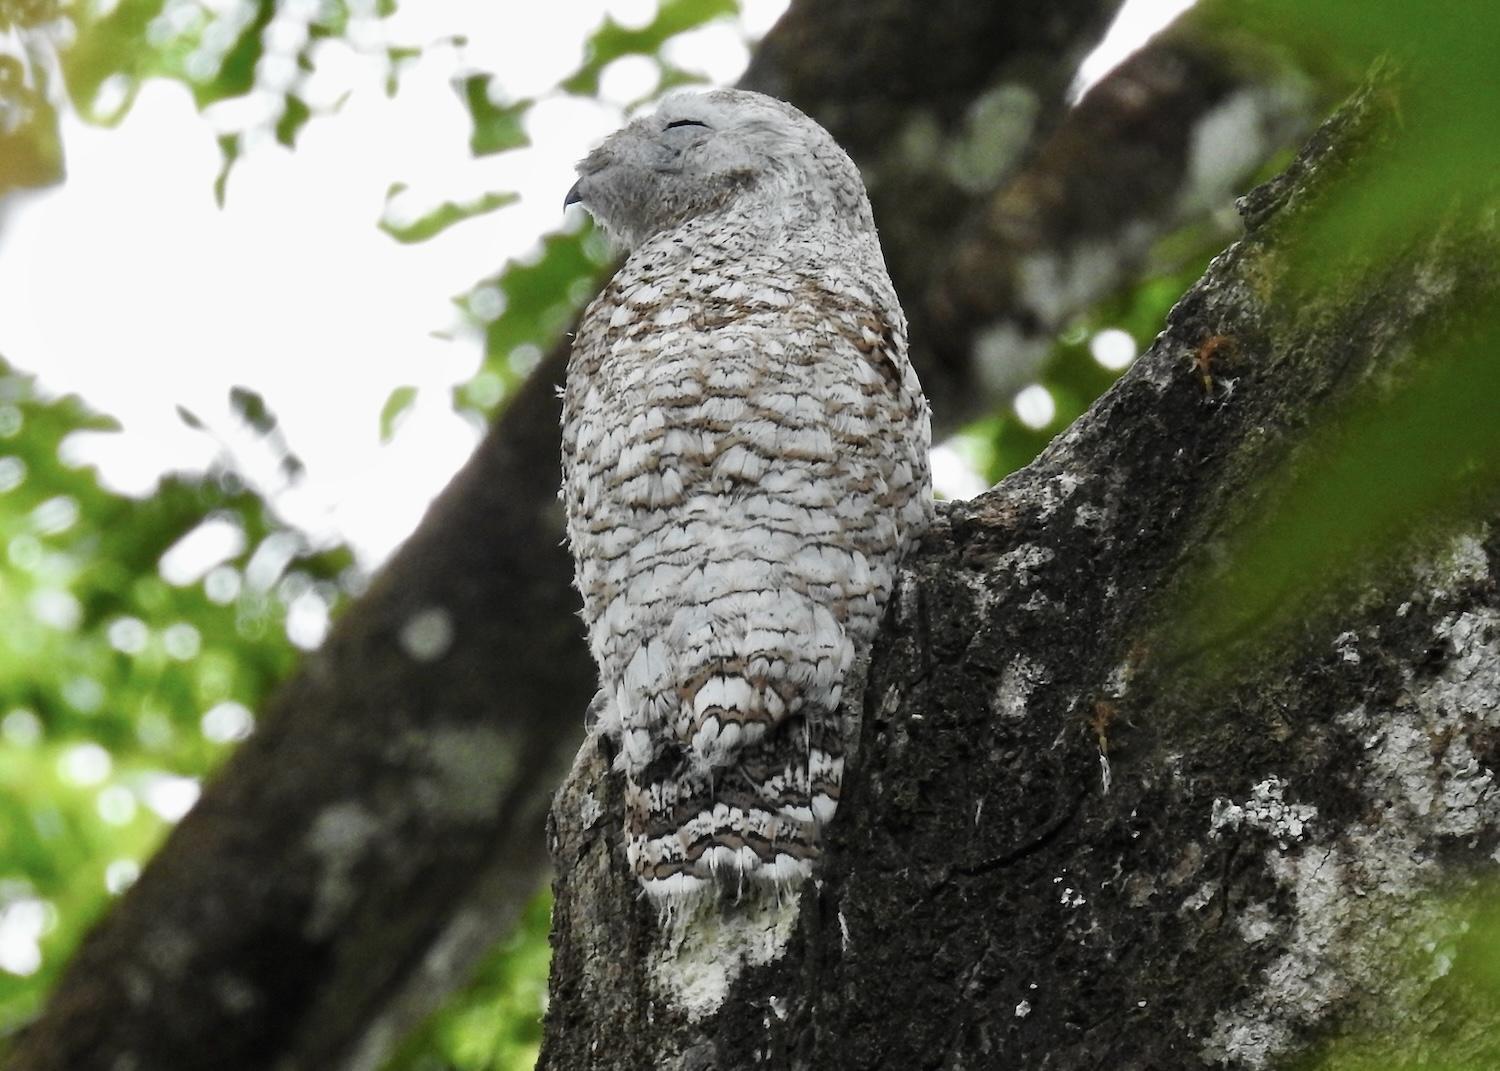 It seems odd to see a Snowy owl in steamy Costa Rica, but this one was spotted near the Caño Negro Wildlife Refuge.